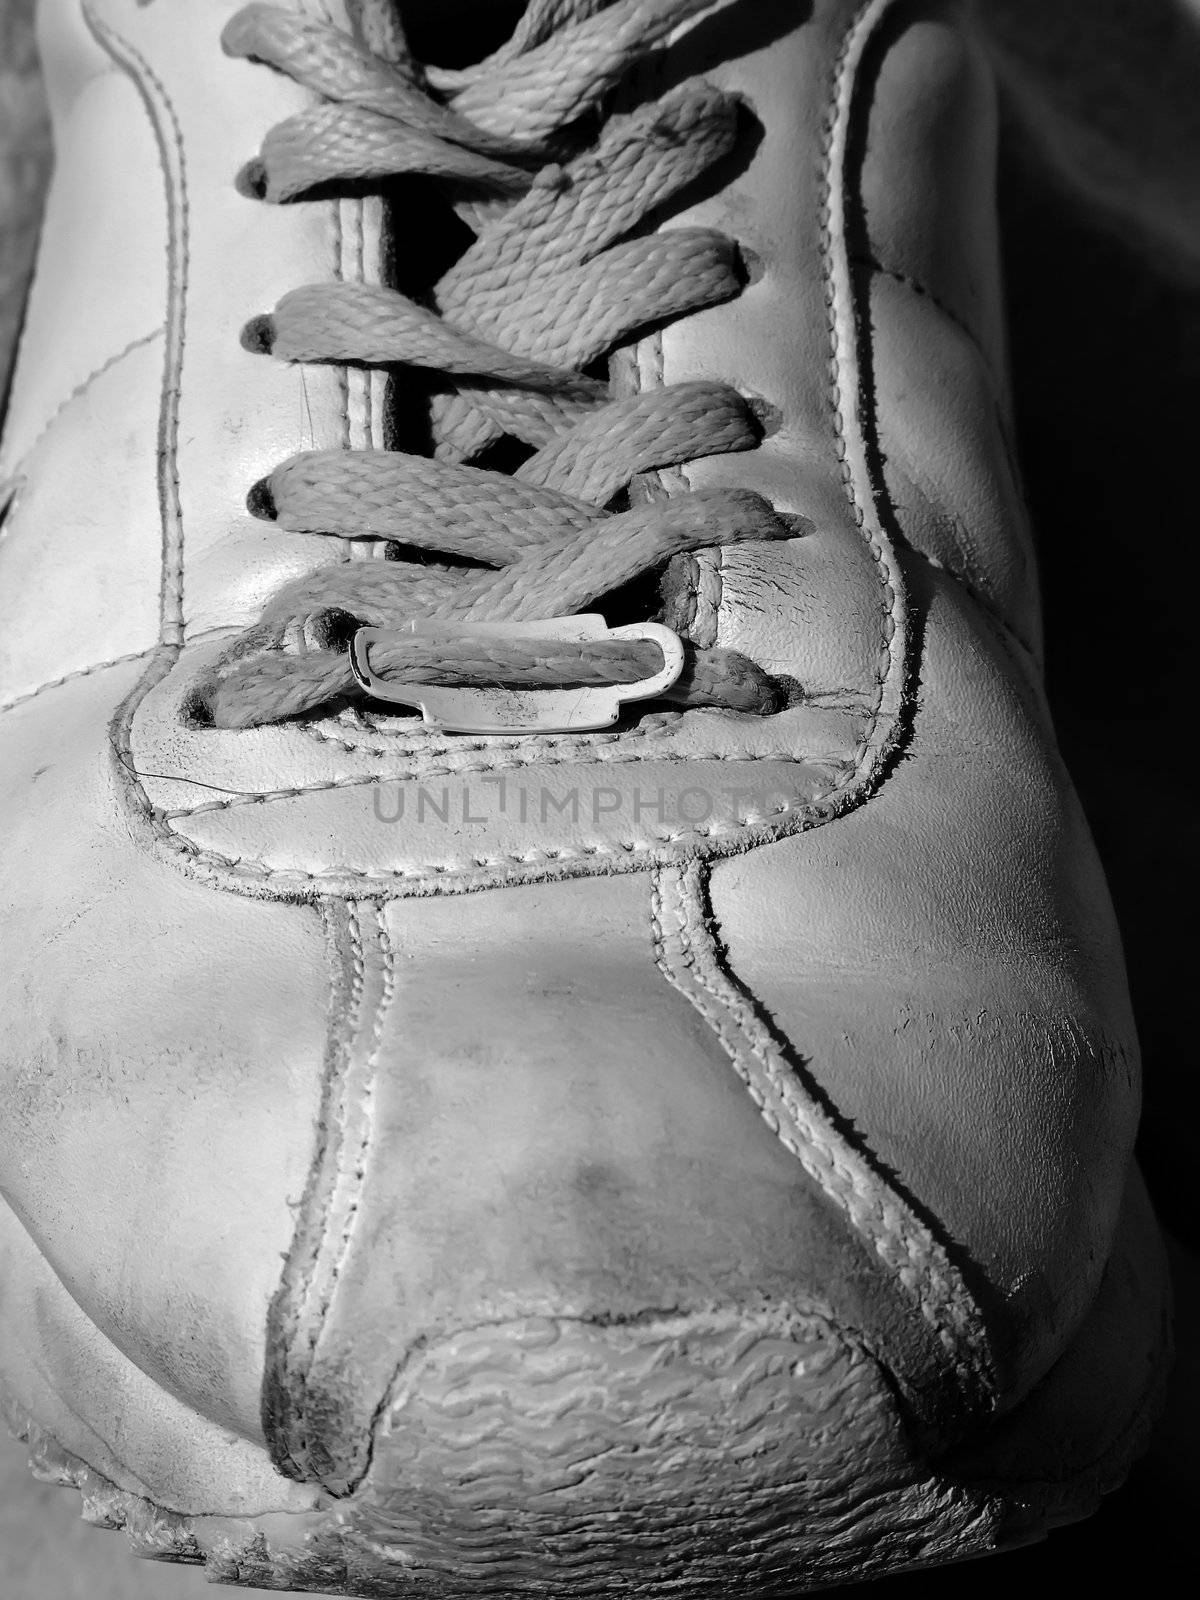 Detail shot of old worn out sneakers, depicting the sneaker culture